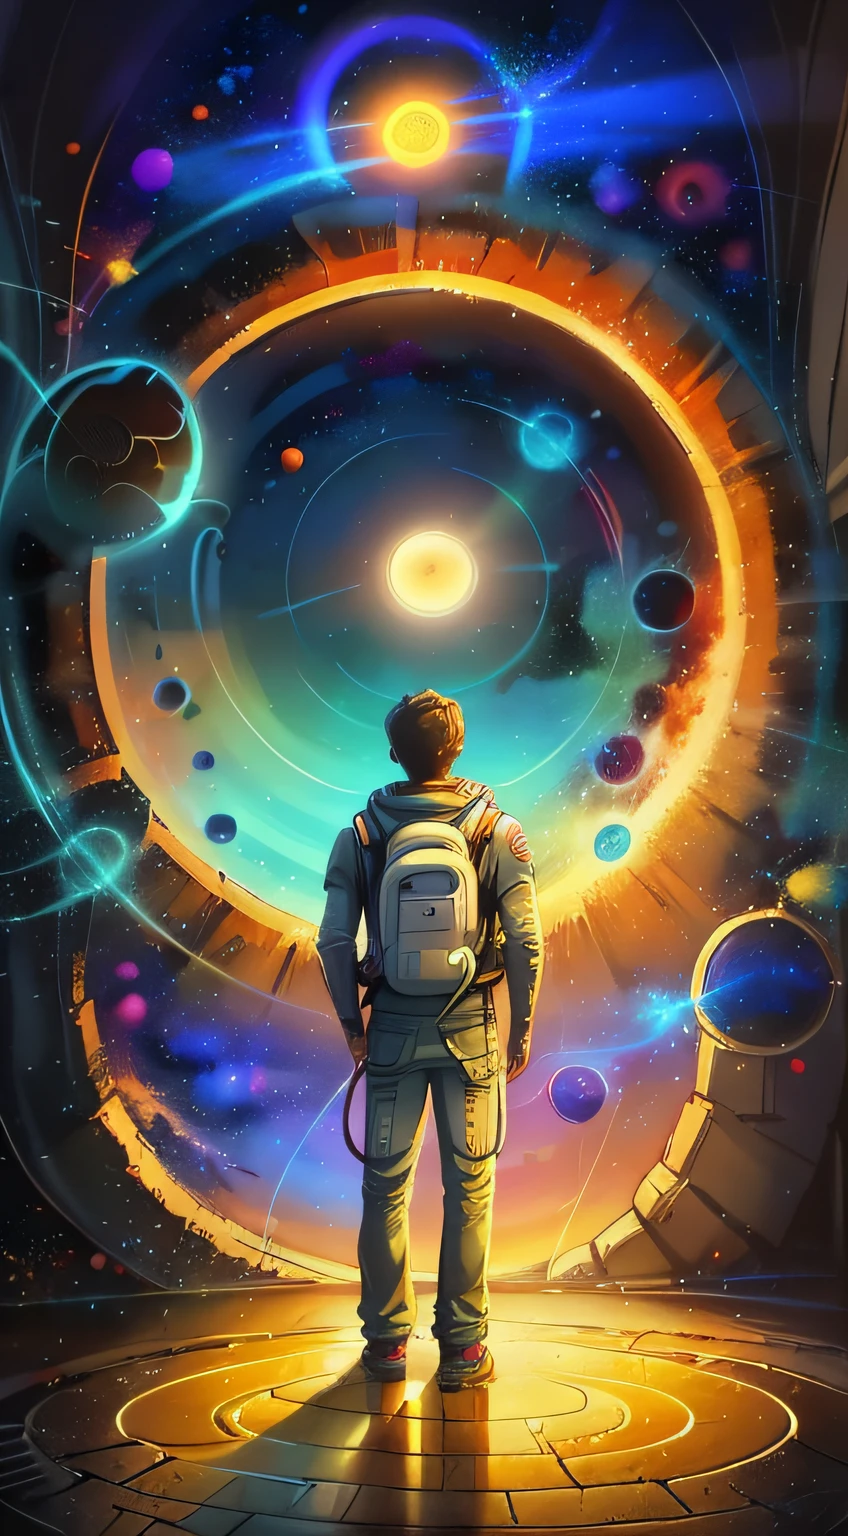 a man standing in front of a space portal with a view of the sun, cyril rolando and goro fujita, portal to another universe, inspired by Cyril Rolando, portal to another dimension, world seen only through a portal, high quality fantasy stock photo, portal to another world, portal to outer space, in style of cyril rolando, looking out into space